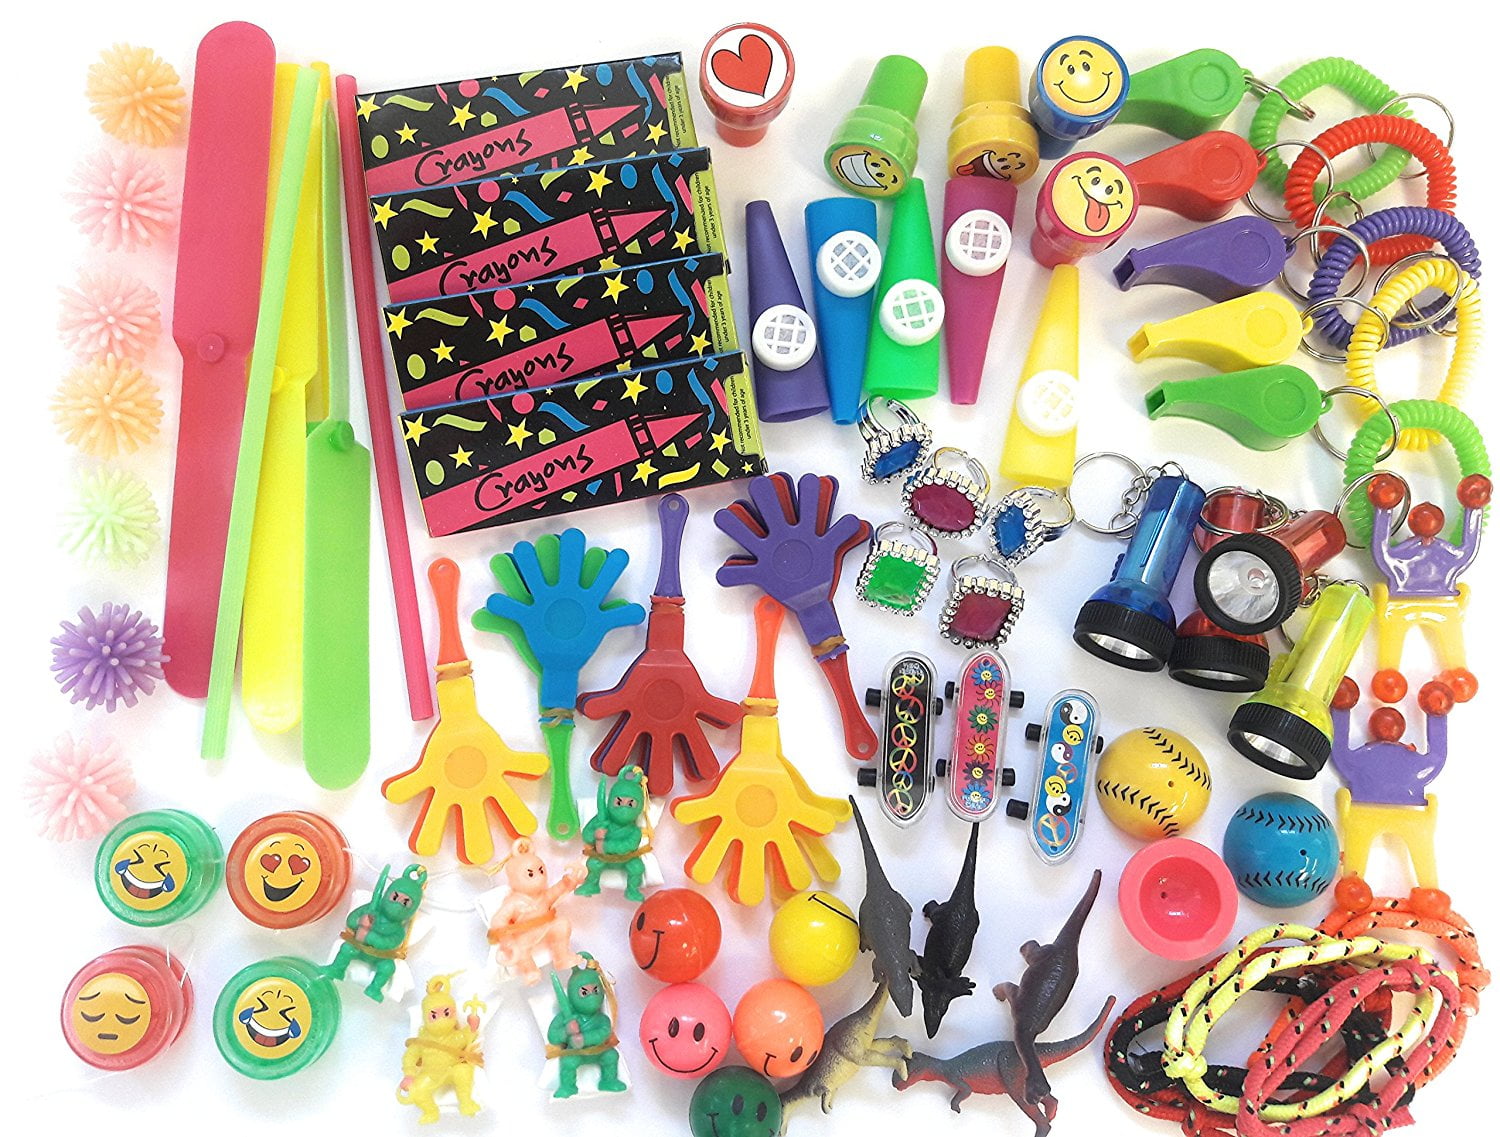 Pinata Filler Carnival I Premium Party Favor Toy Assortment in Big 120 Pack Treasure Box Birthday Party Goodie Bag Fillers Prizes Party Favors for Kids Classroom Rewards Halloween Bulk Toys